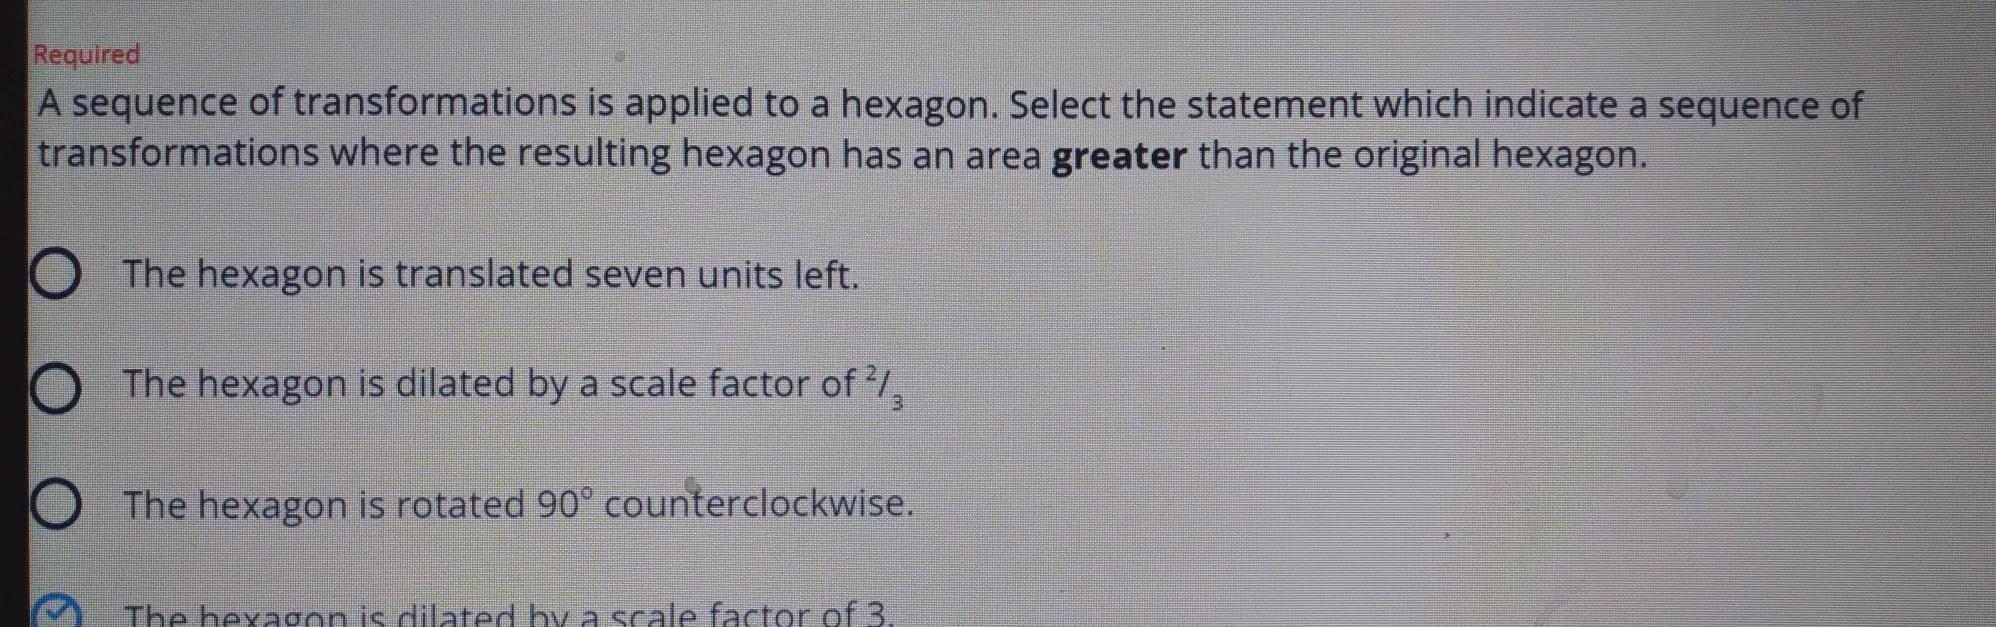 Can You Show Me How To Do This Problem So I Can Understand It?